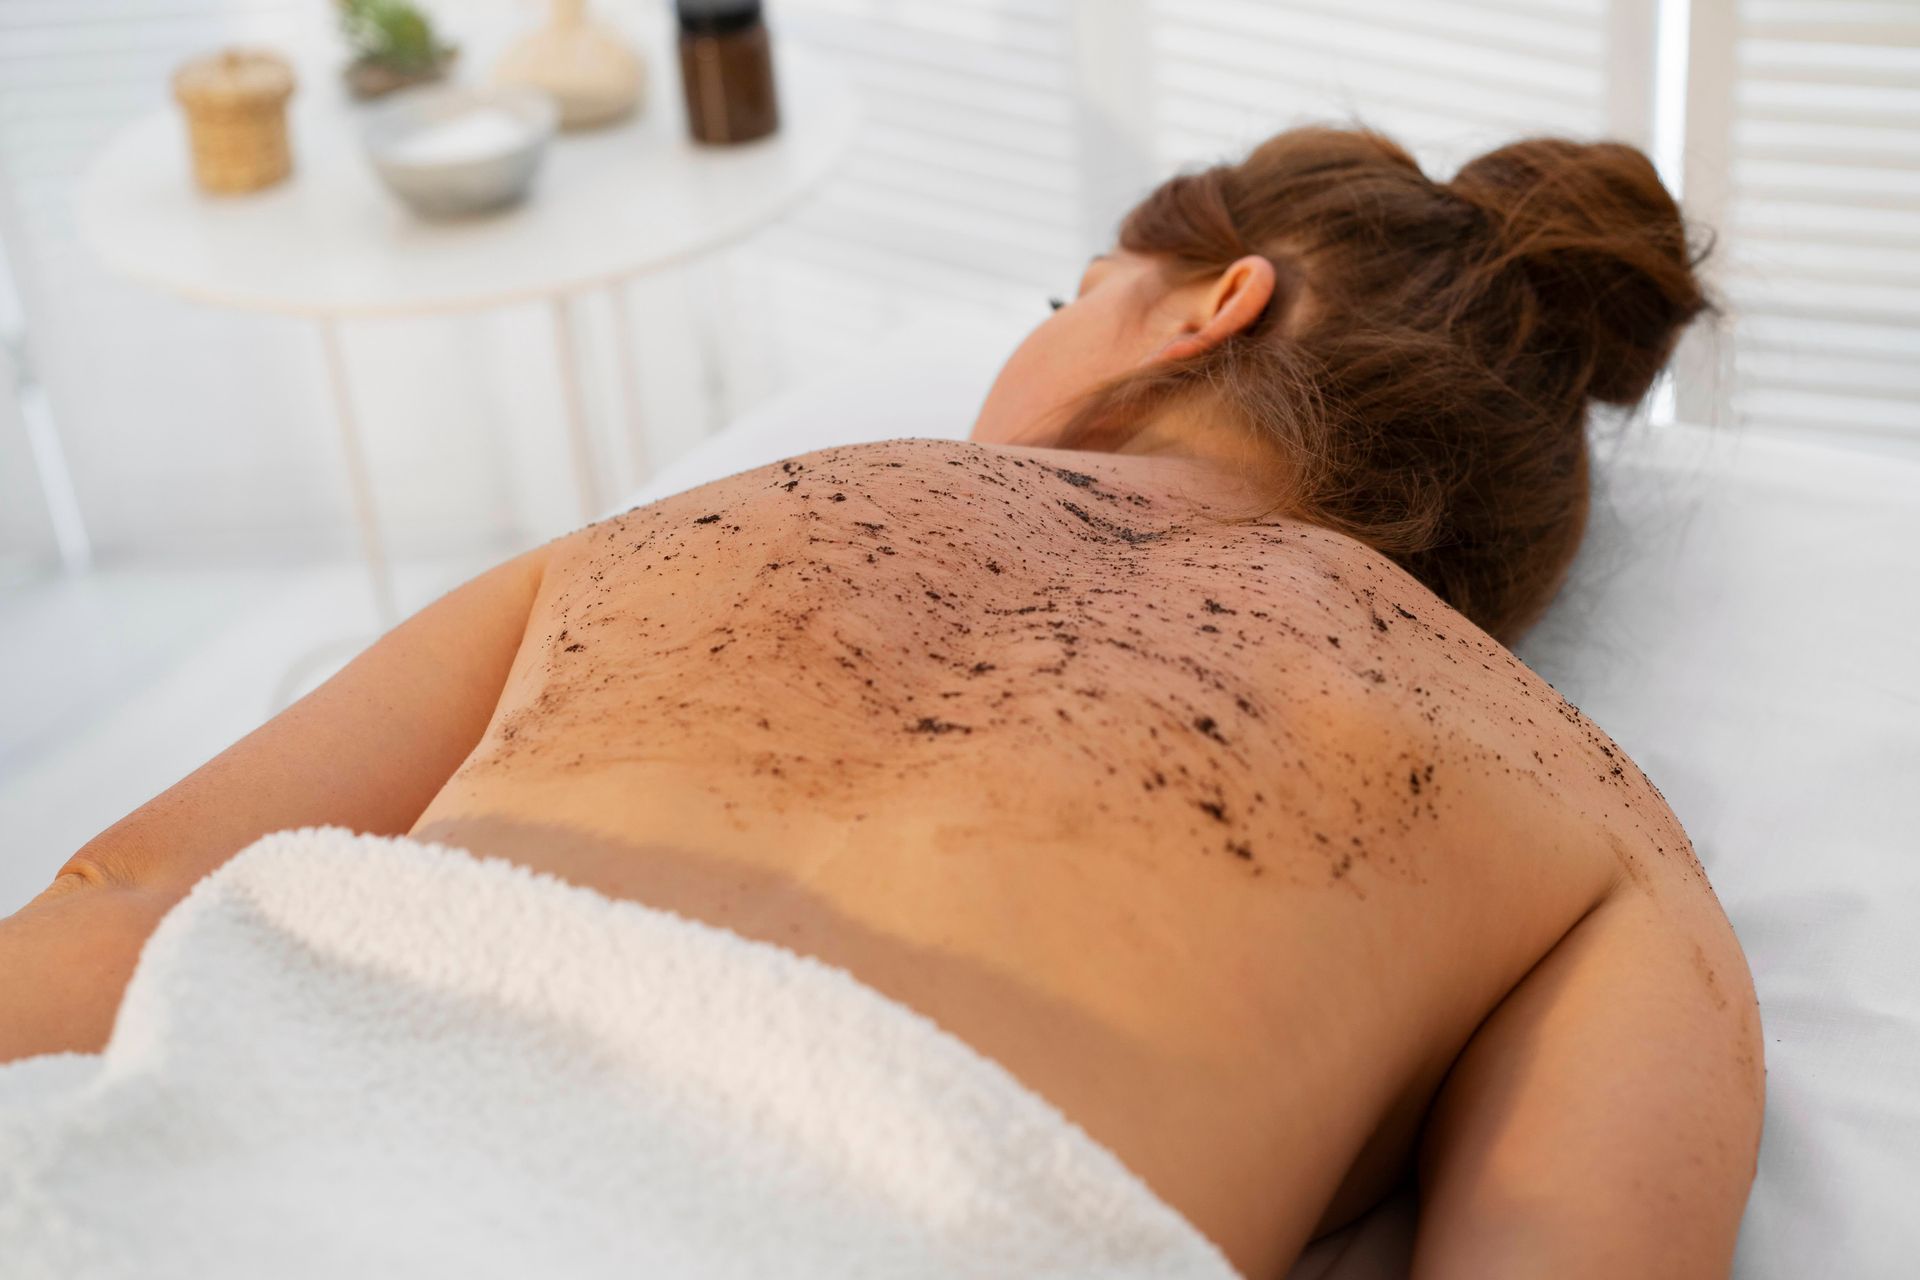 a woman is getting a body scrub on her back at a spa .